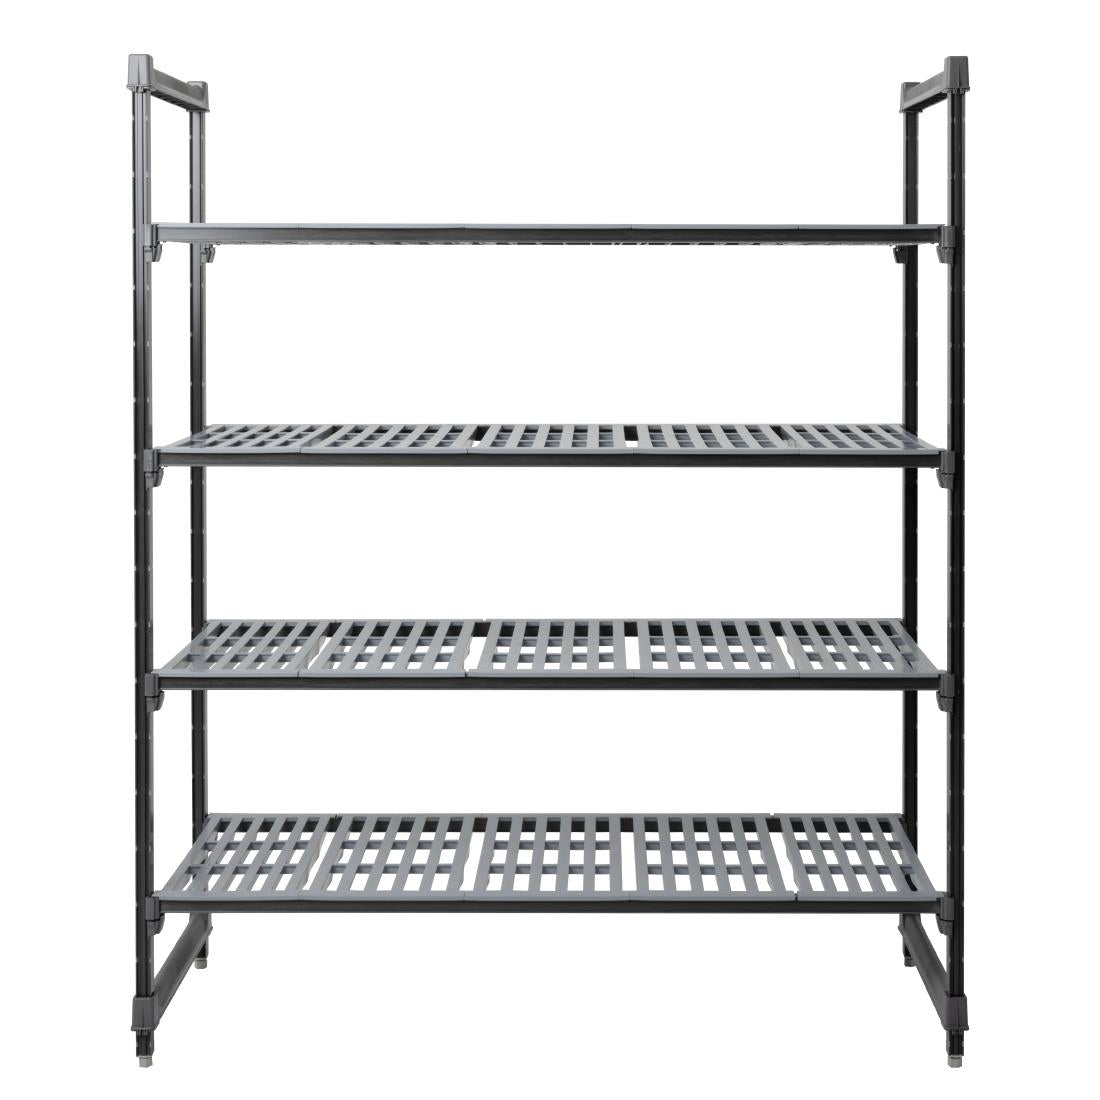 DM776 Cambro Stationary Vented 4 Shelf Starter Units 1830 x 1525 x 610mm JD Catering Equipment Solutions Ltd